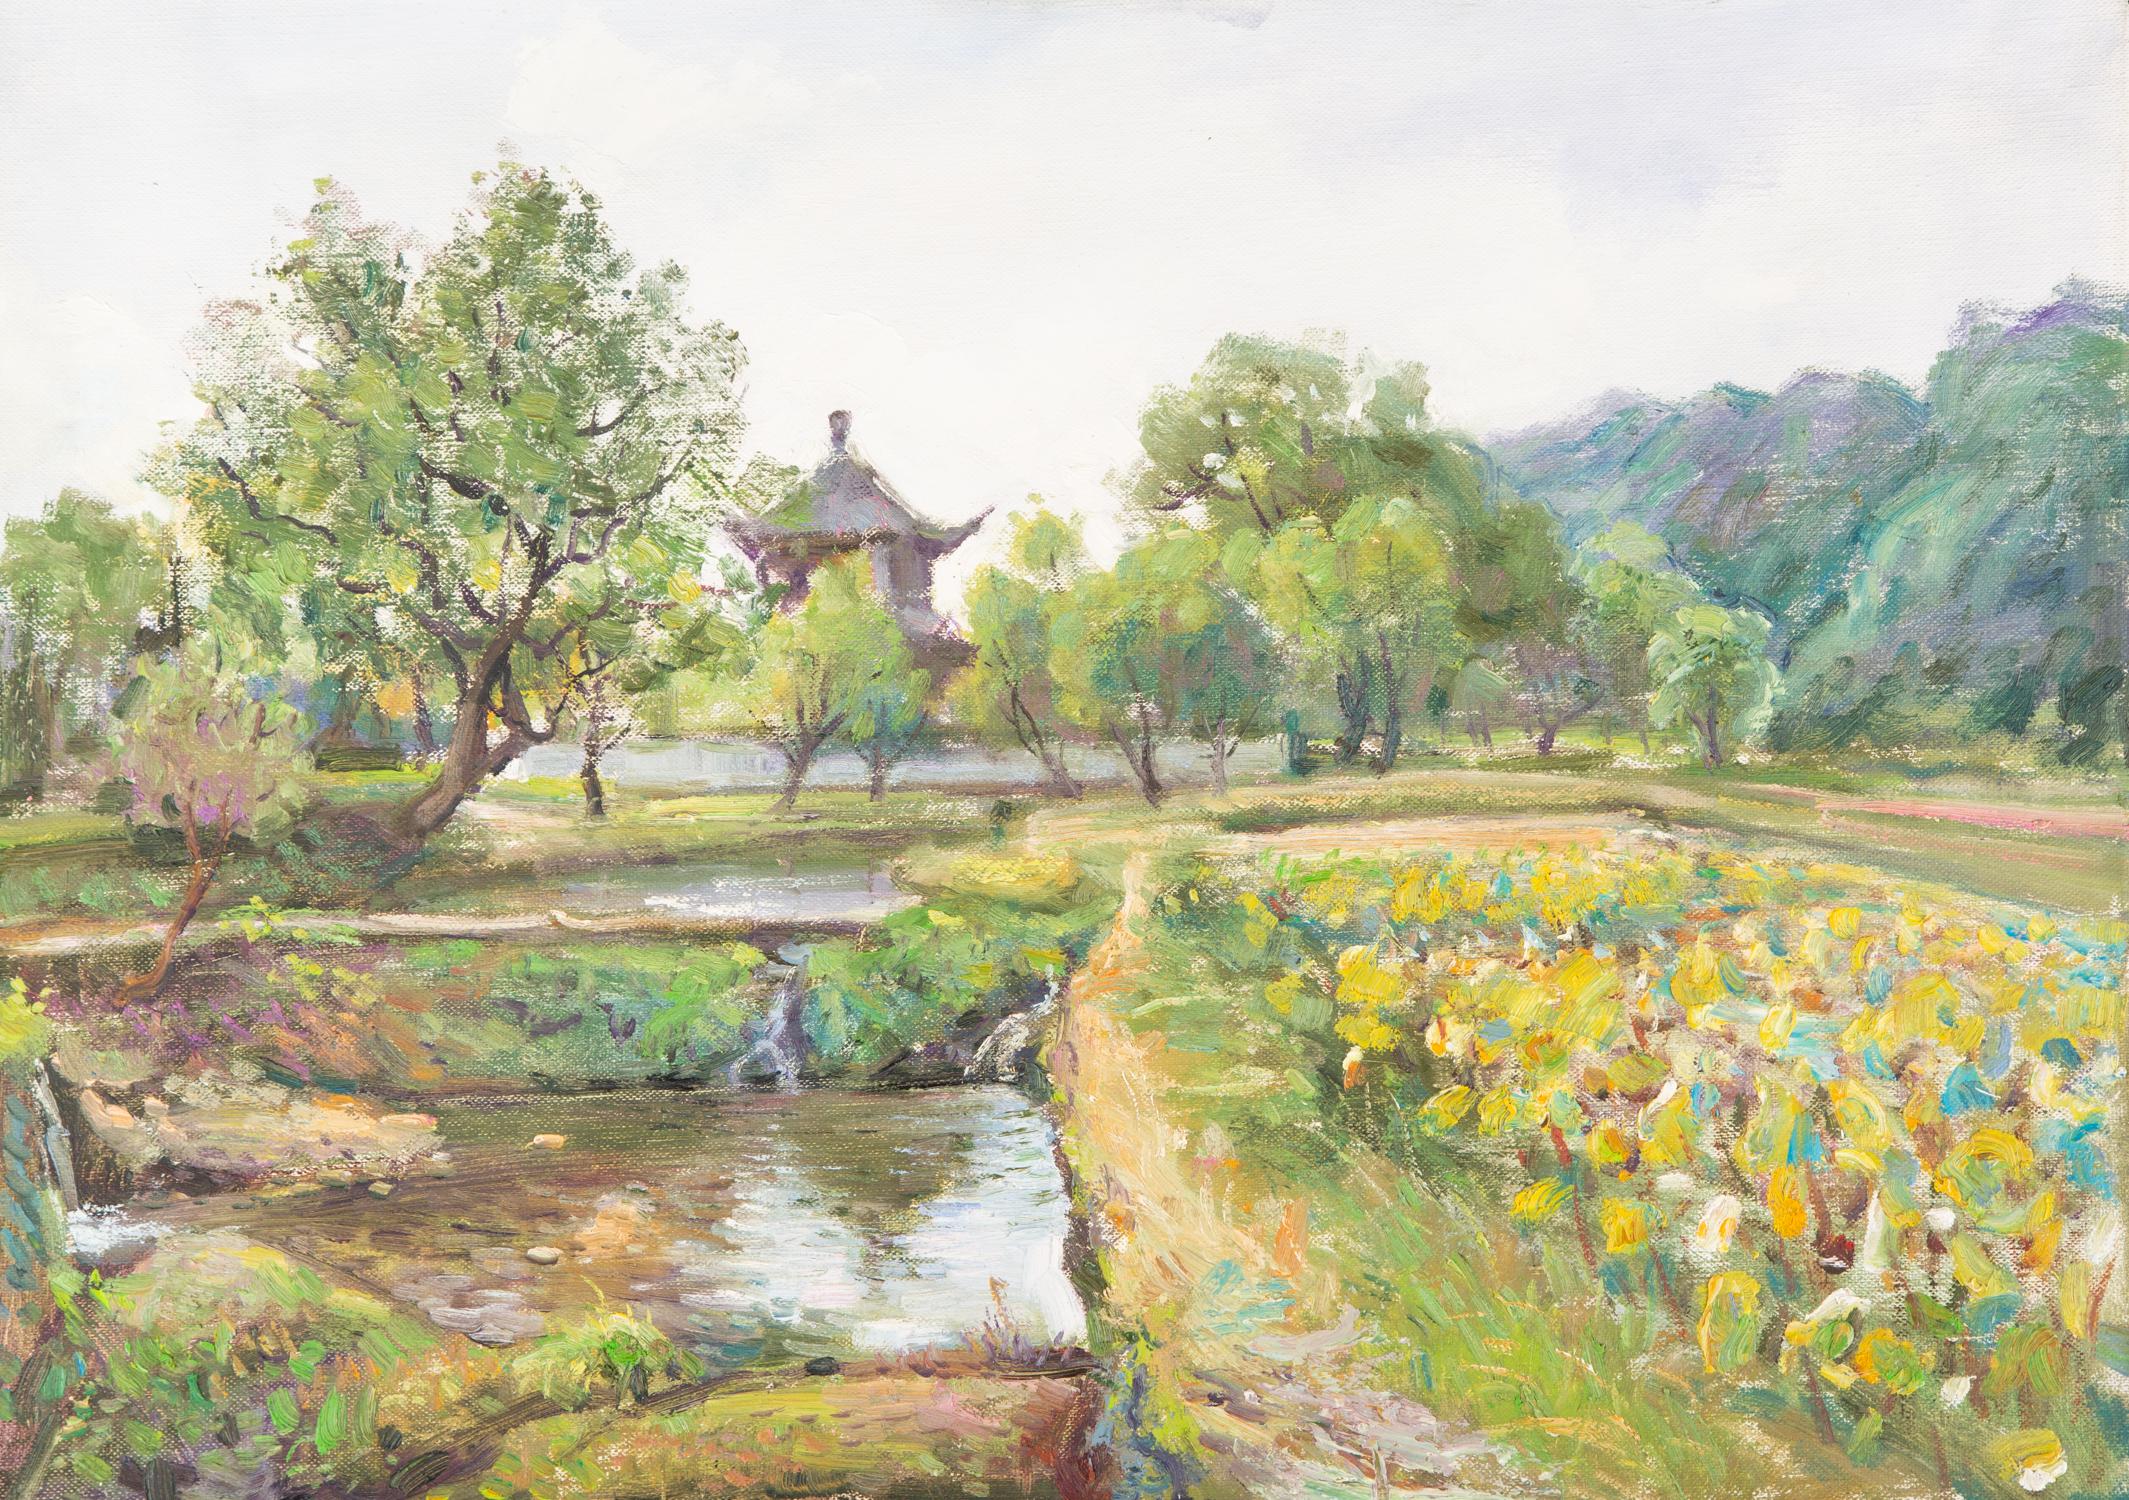  Title: Wetland Park
 Medium: Oil on canvas
 Size: 27.5 x 19.5inches
 Frame: Framing options available!
 Age: 2000s
 Condition: Painting appears to be in excellent condition.
 Note: This painting is unstretched
 Artist: Li Zhao
 Provenance: Direct